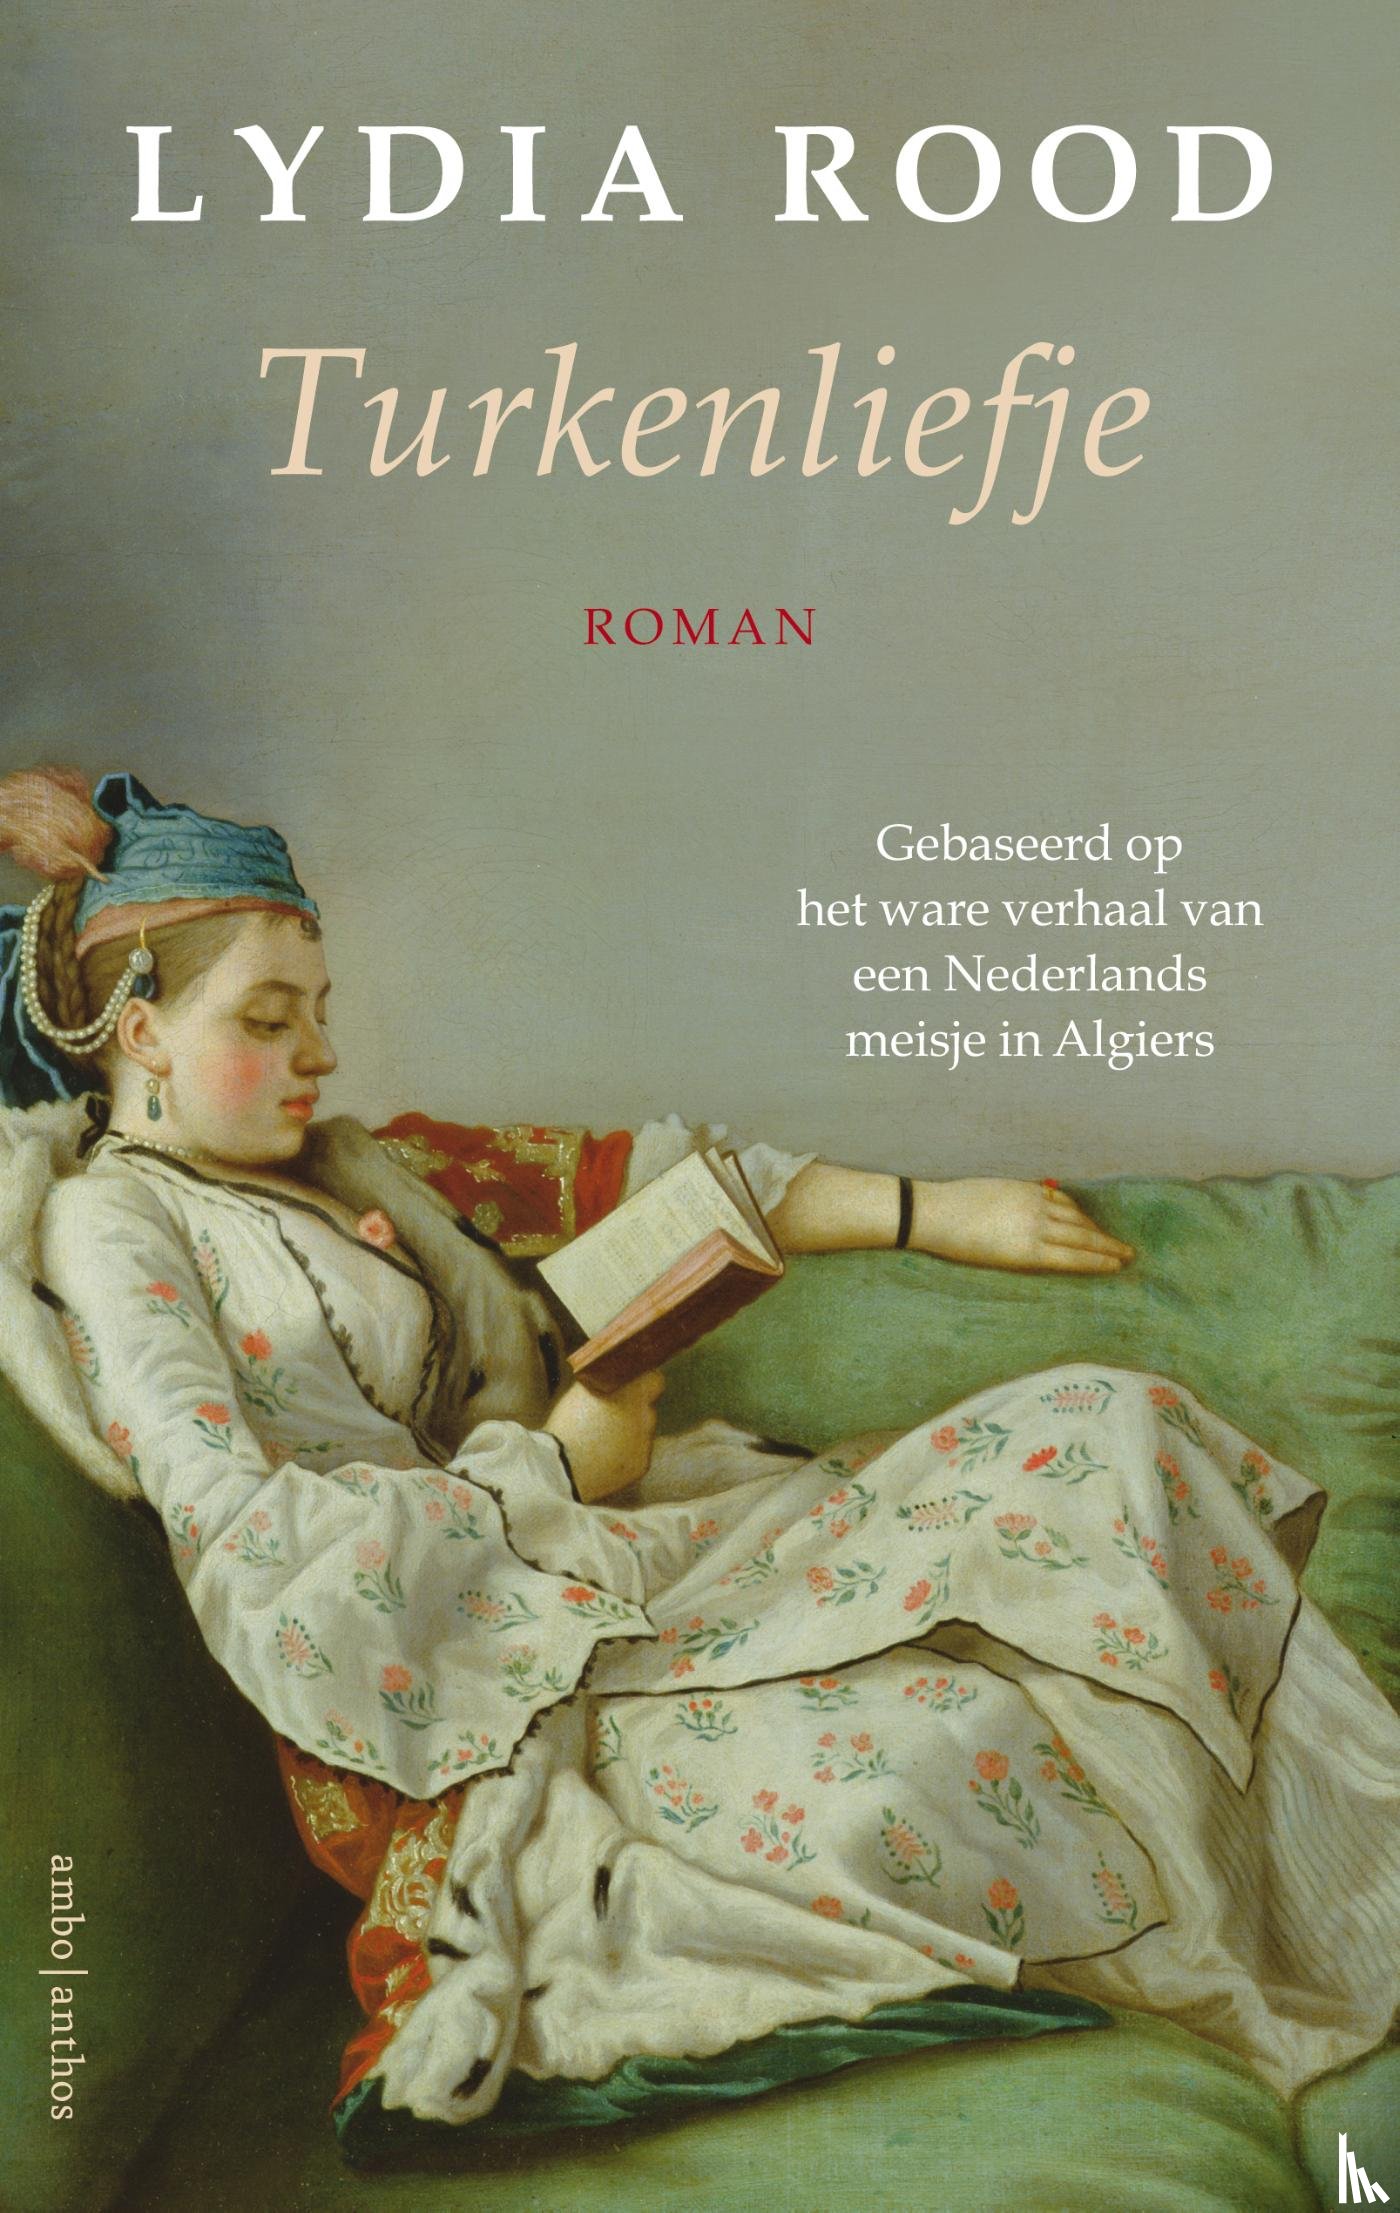 Rood, Lydia - Turkenliefje